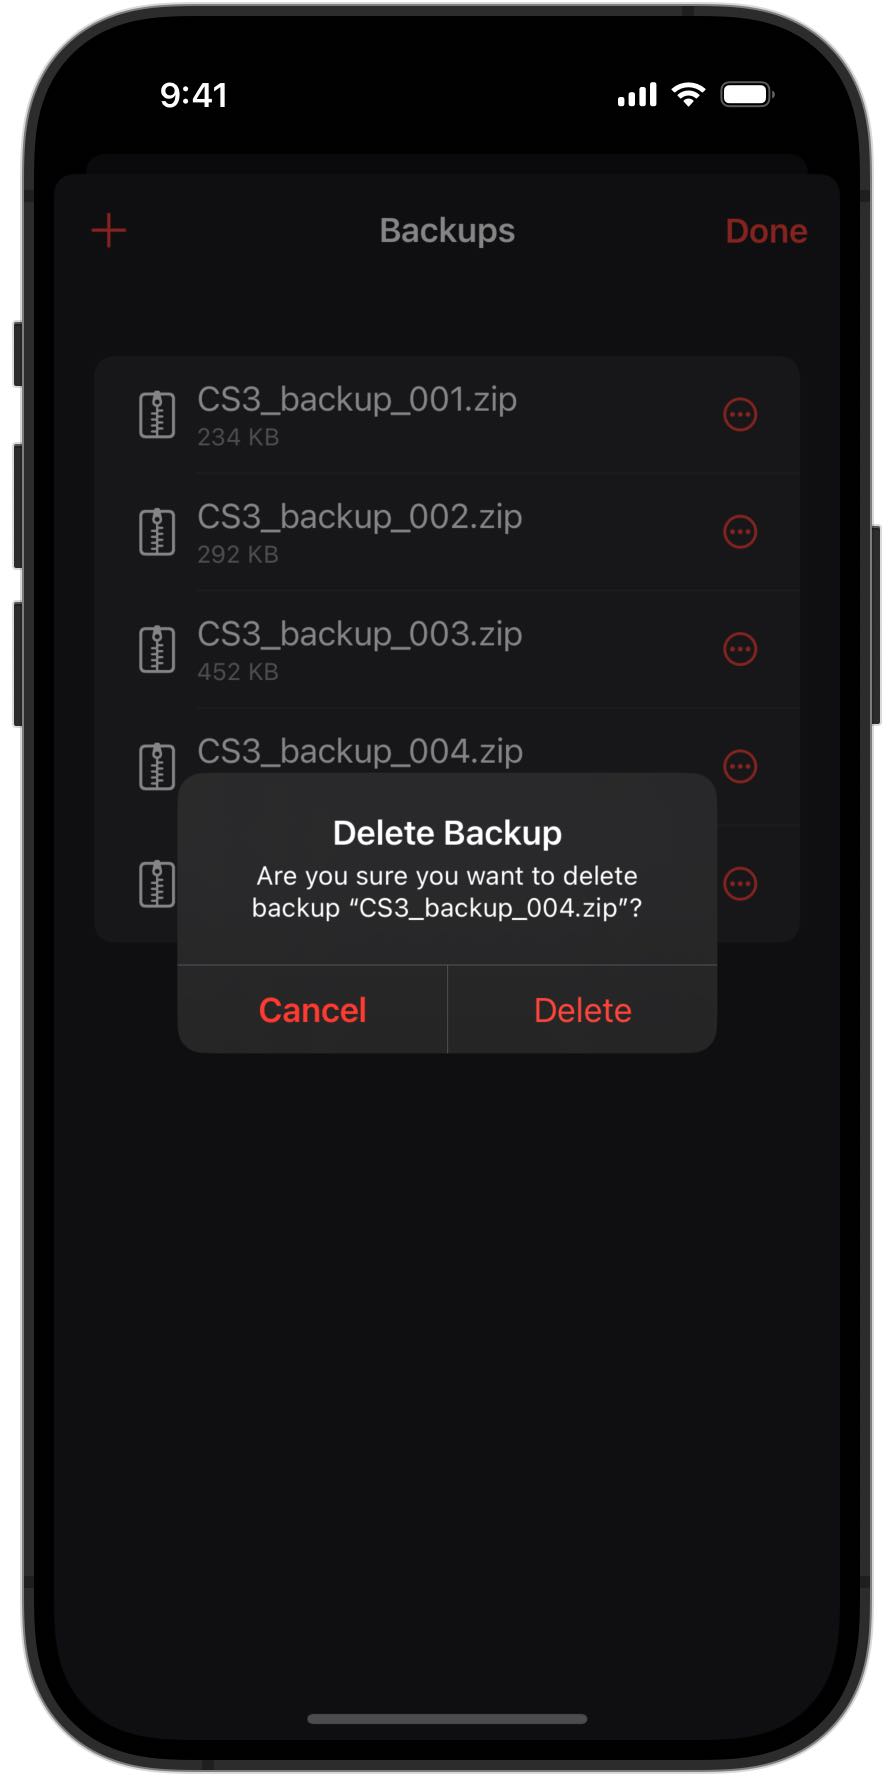 Screenshots of an iPhone showing a delete confirmation in RailControl Pro